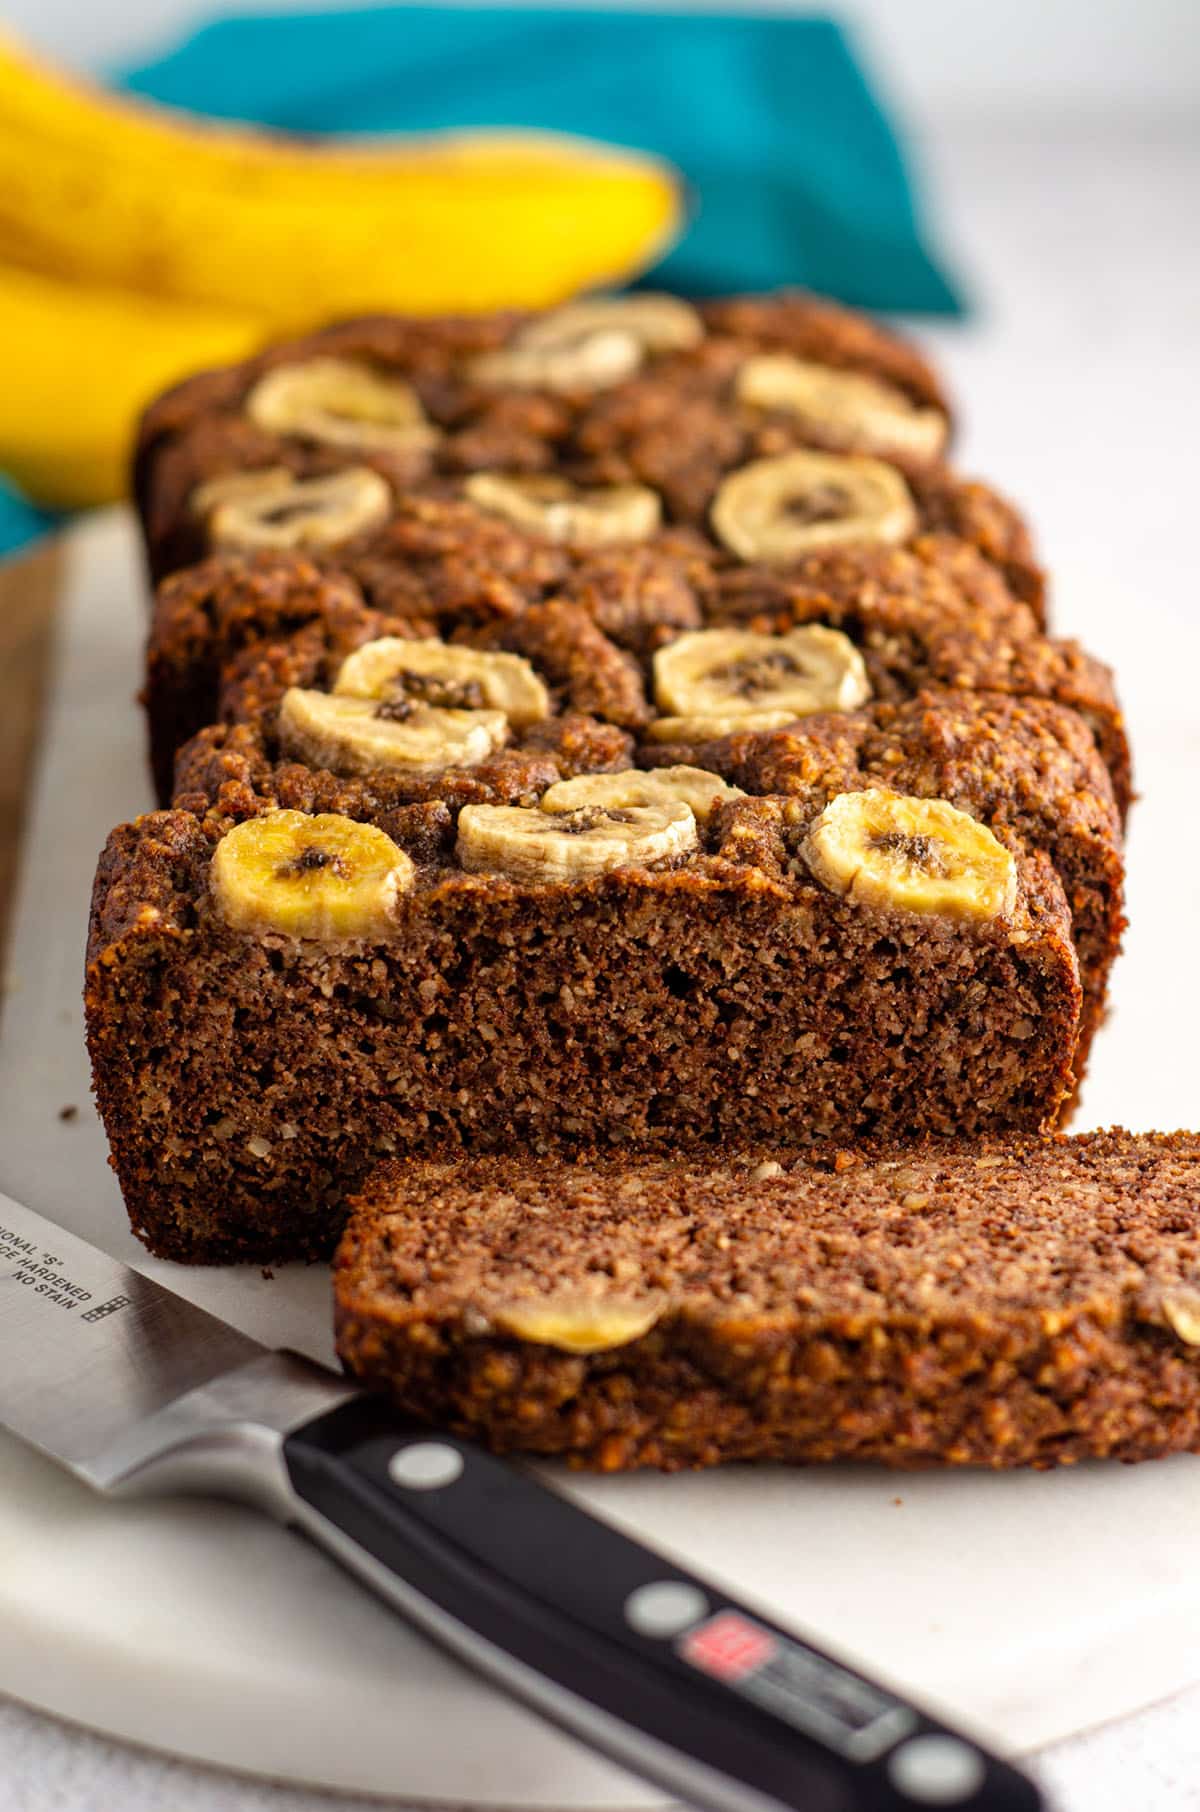 Almond Flour Banana Bread: Moist and flavorful banana bread made entirely with almond flour for a naturally gluten free quick bread.